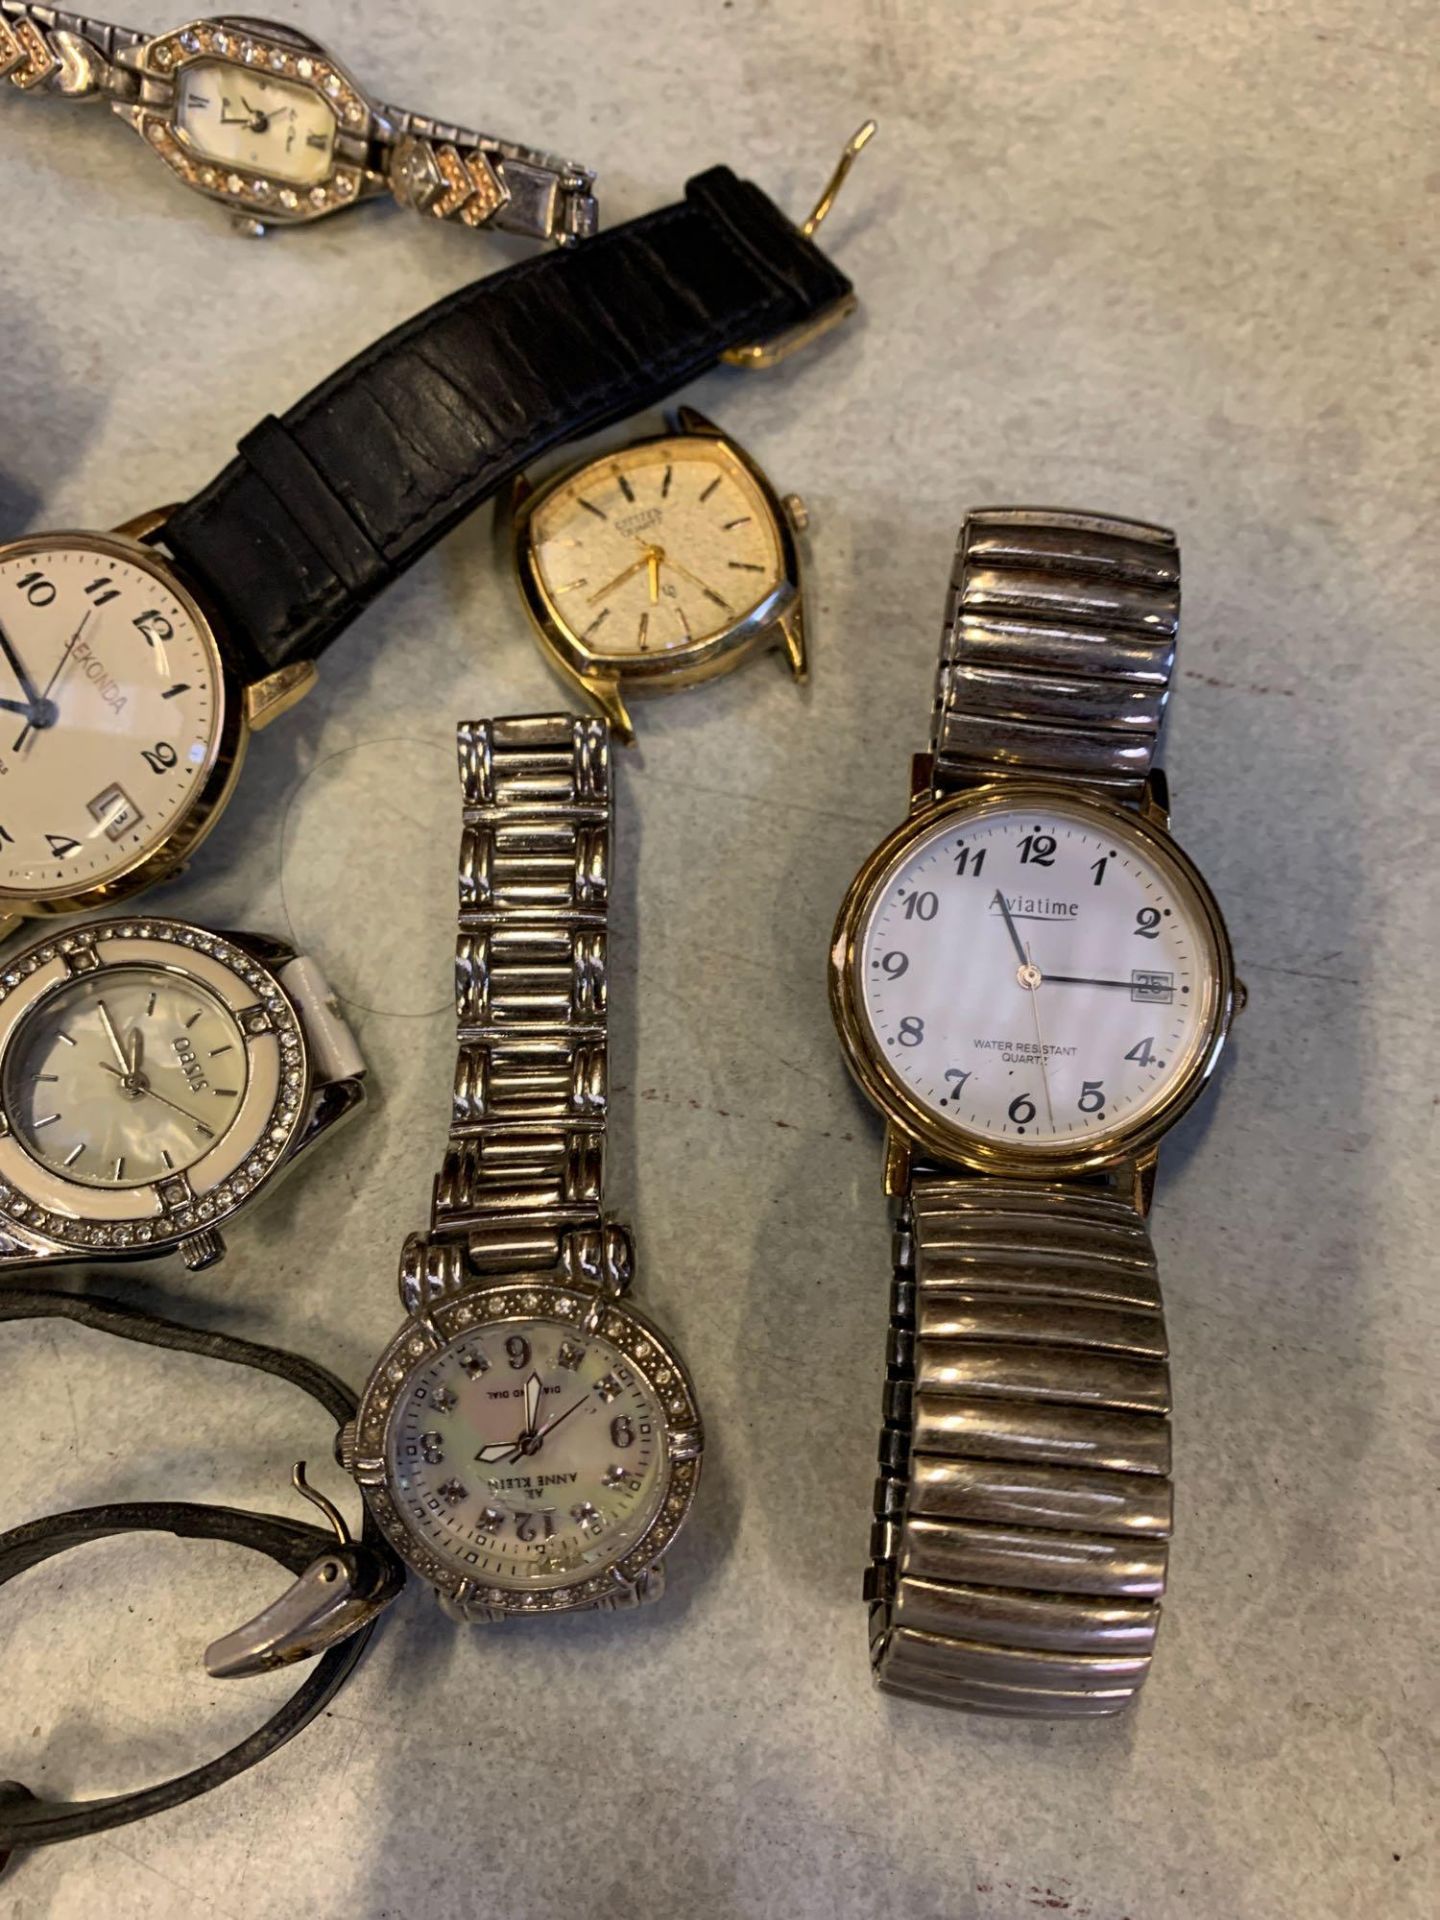 A quantity of wristwatches, cufflinks and tie pins - Image 3 of 6